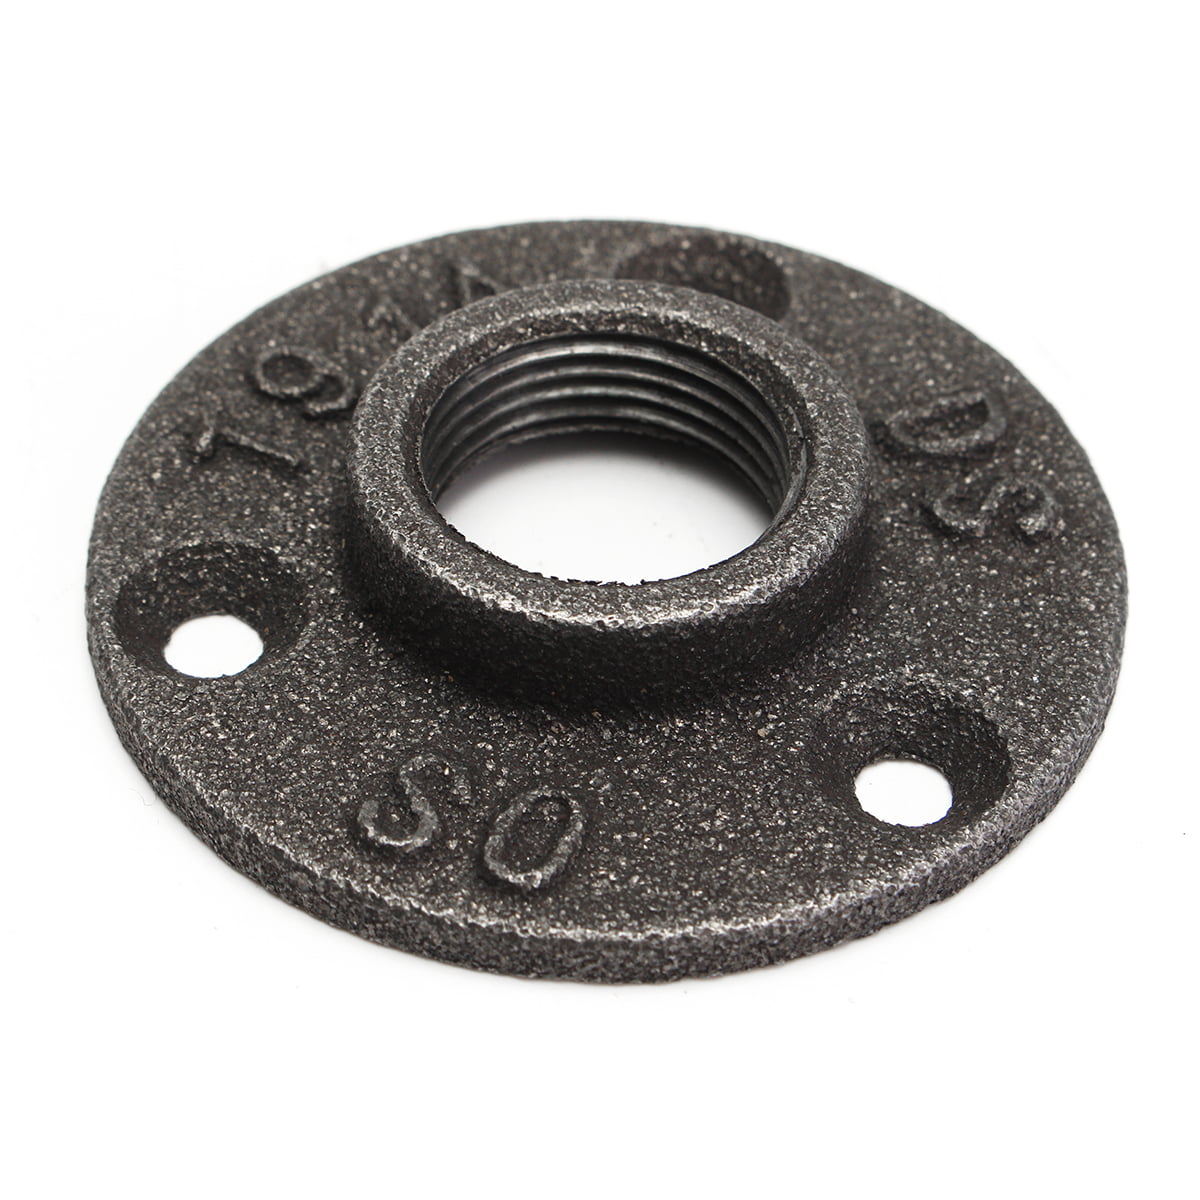 FURNITURE 1/2" BLACK MALLEABLE IRON BSPT FLOOR/WALL FLANGE PLATE 